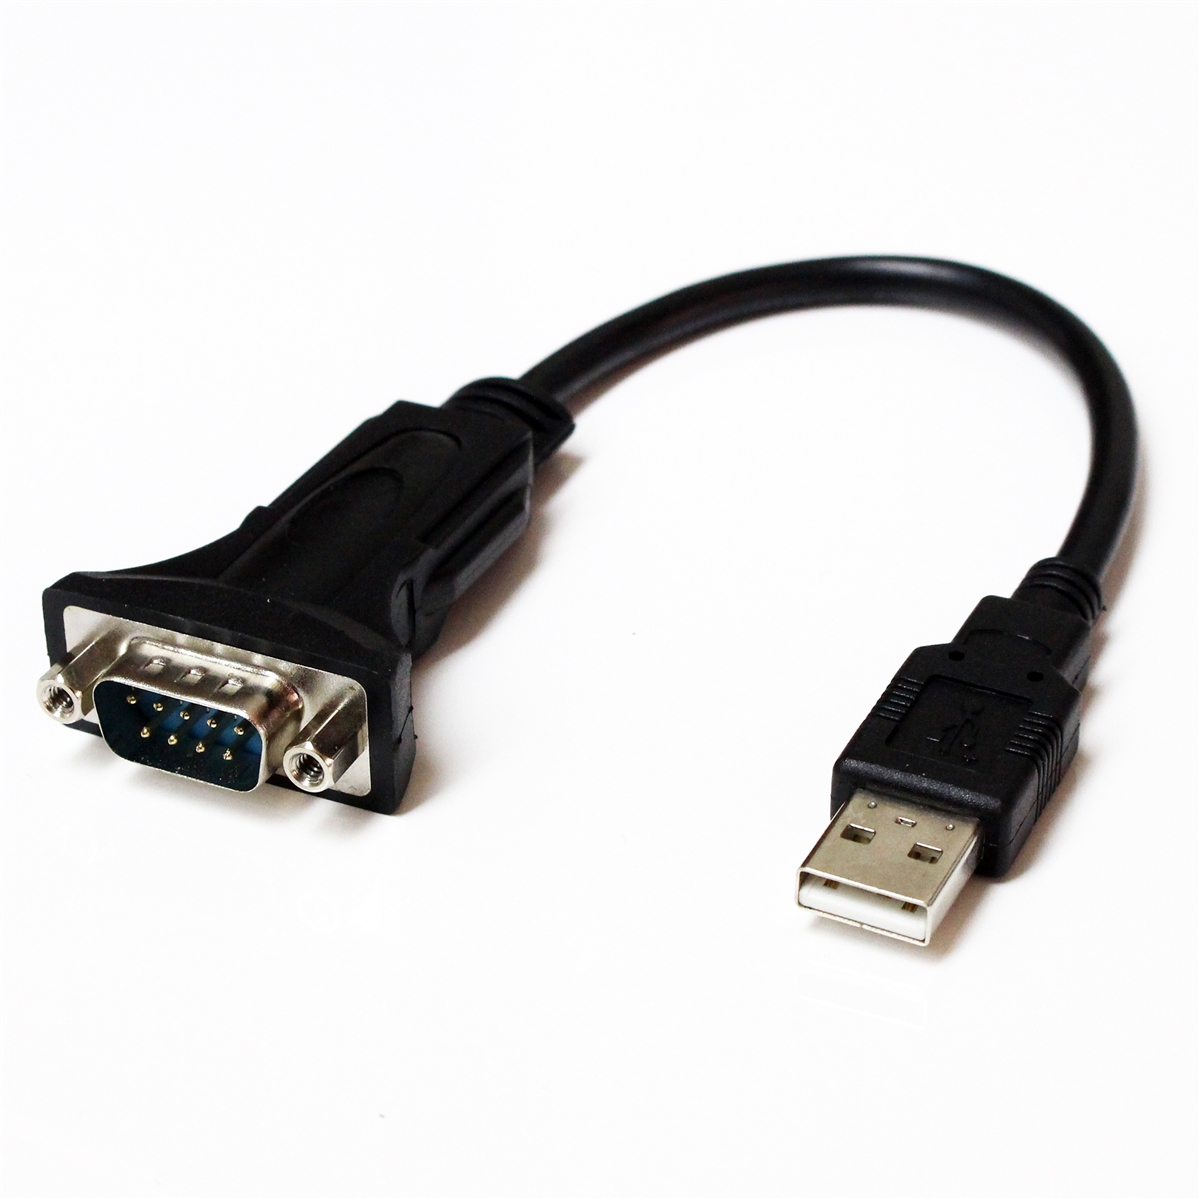 Usb to serial converter cable